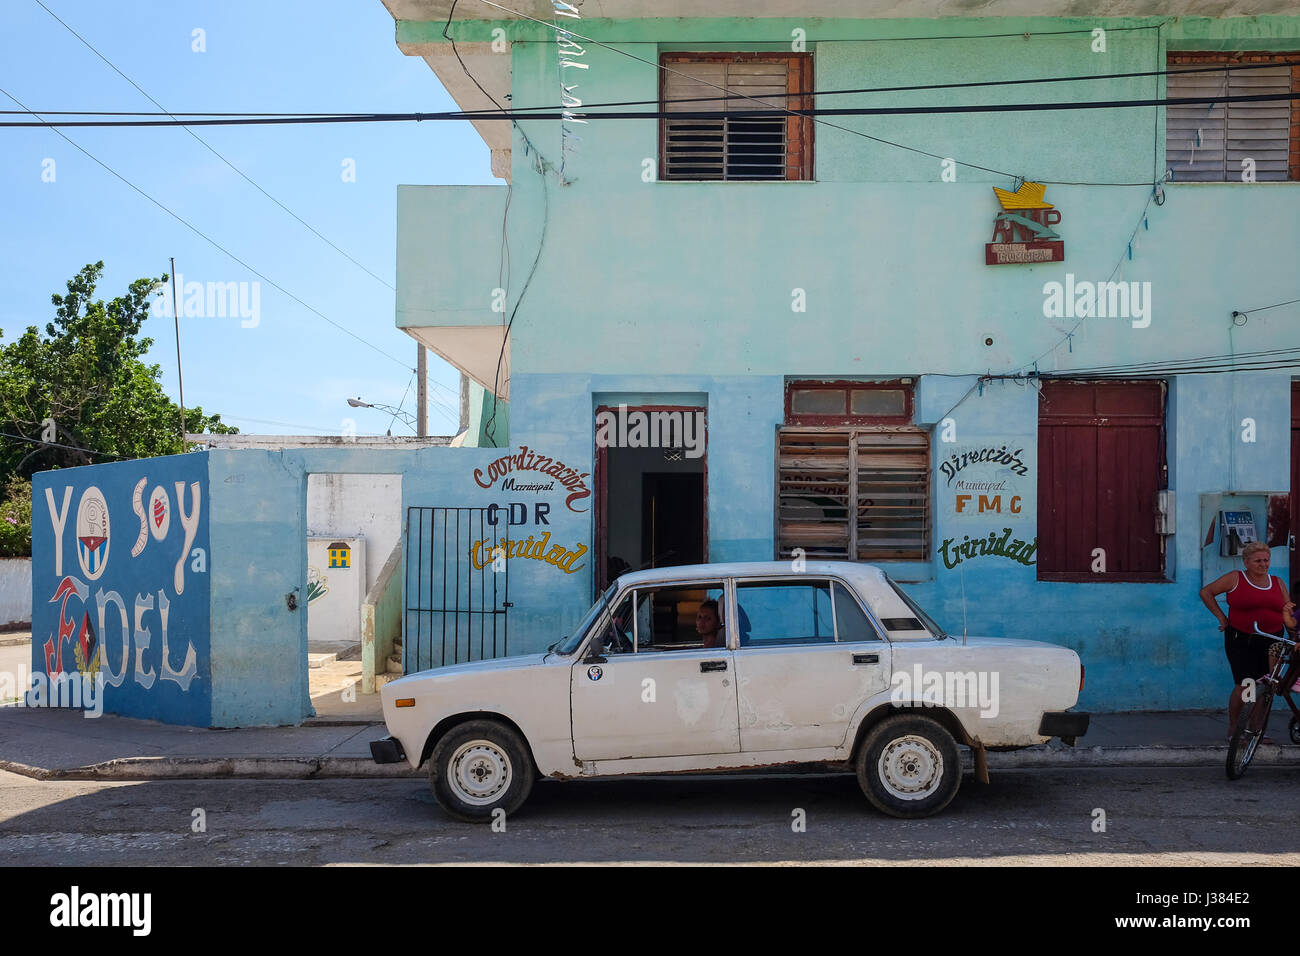 old classic car parked on the streets of Cuba, on the background a propaganda mural 'I am Fidel' Stock Photo